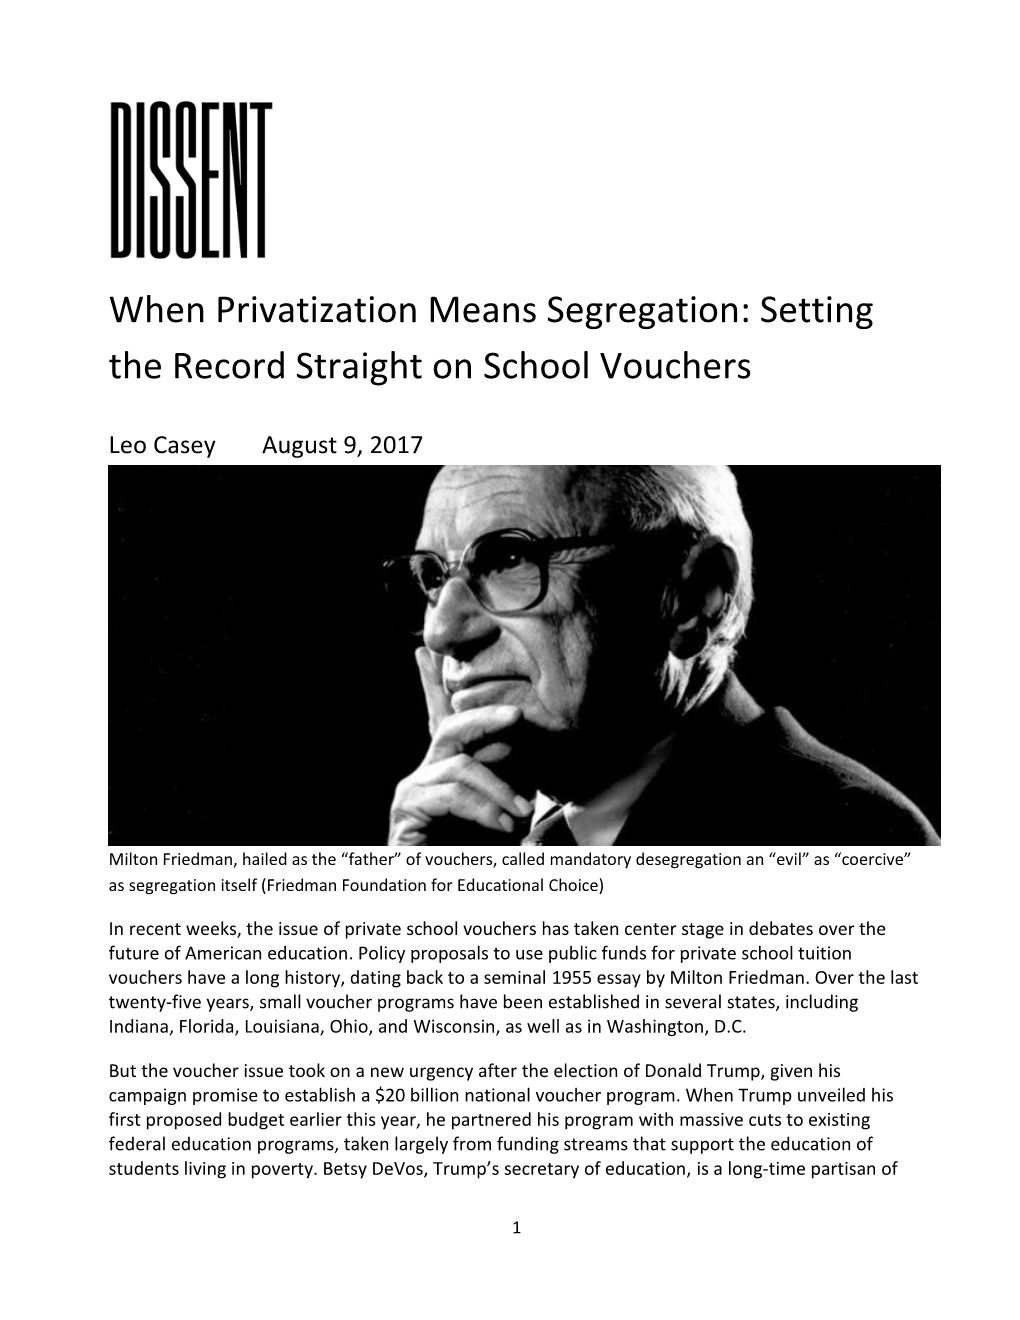 When Privatization Means Segregation: Setting the Record Straight on School Vouchers